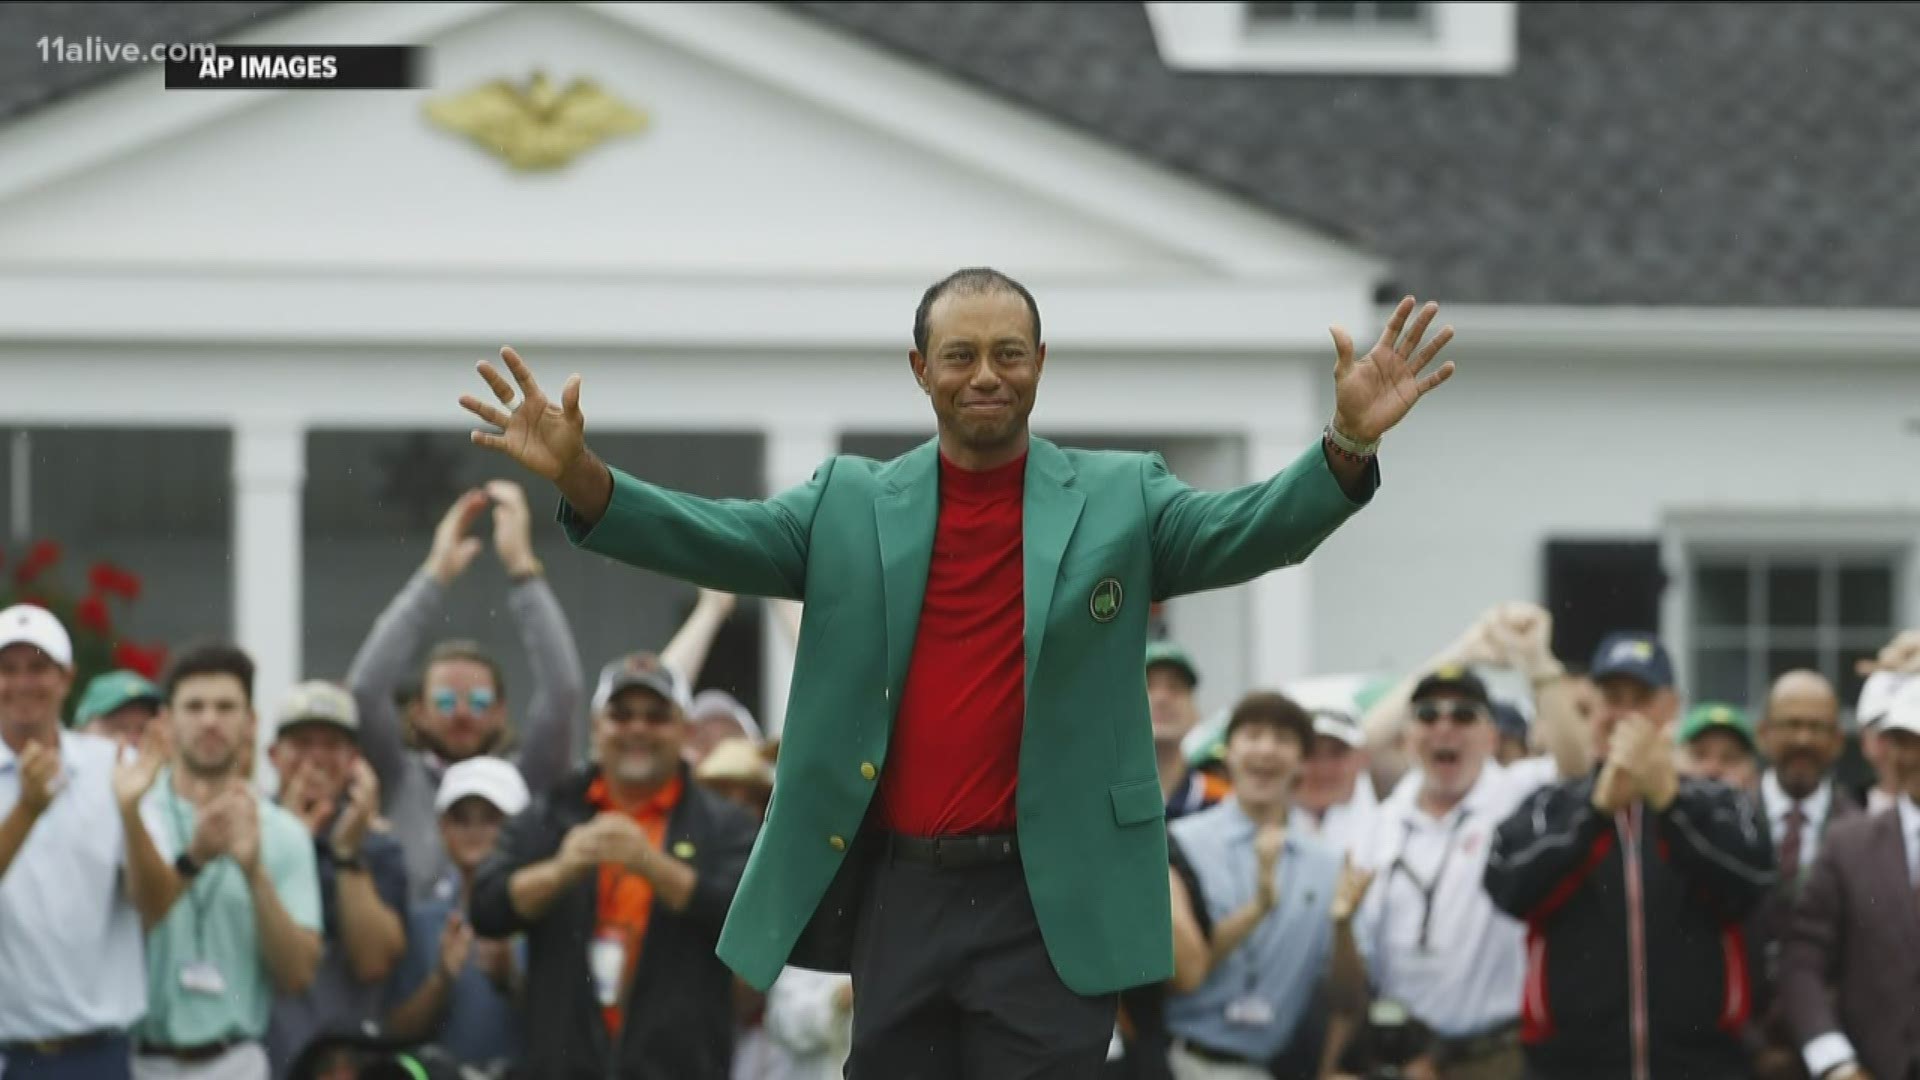 Woods had a comeback professionally and in his personal life.